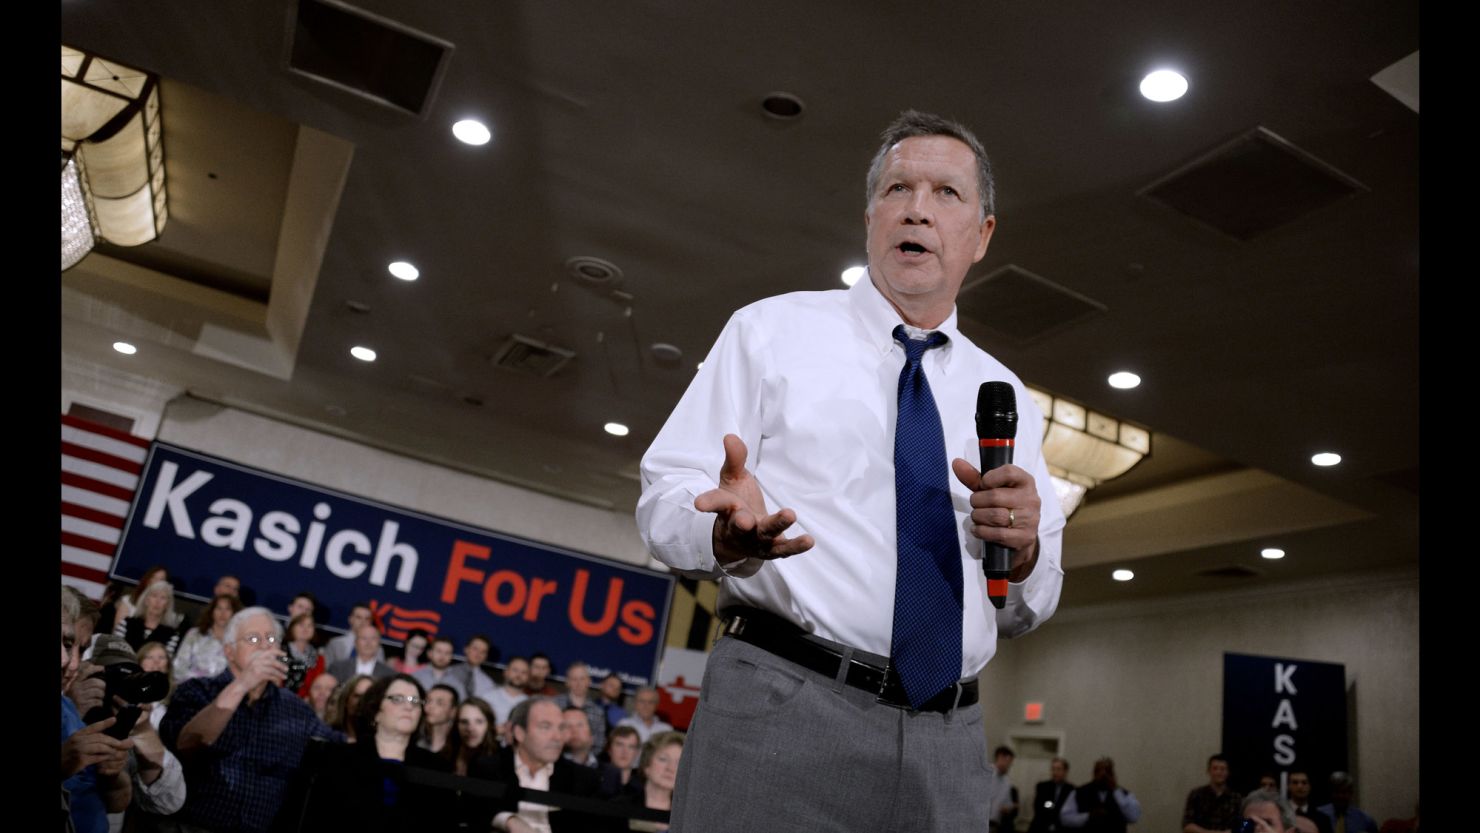 John Kasich speaks during a town hall-style campaign stop at the Crowne Plaza on April 19, 2016 in Annapolis, Maryland.